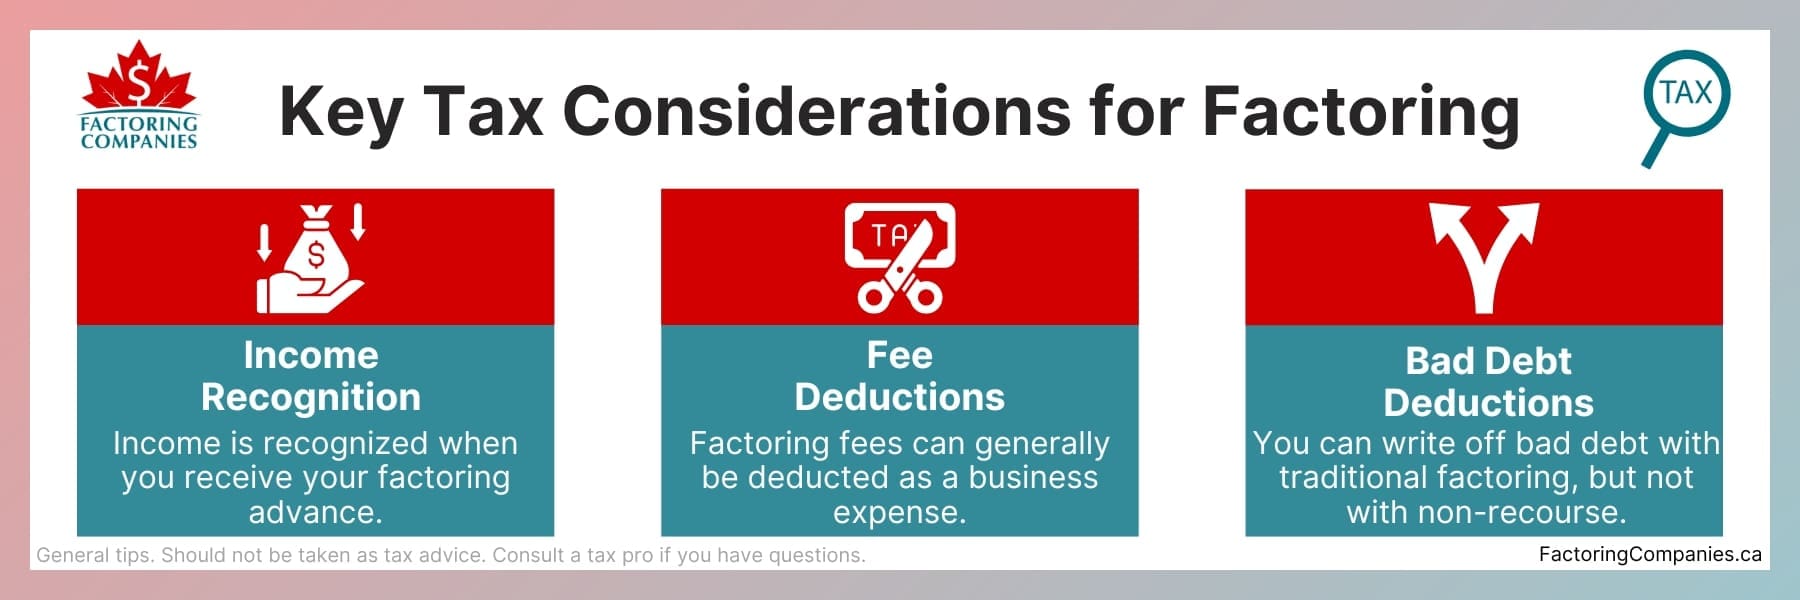 Key Tax Considerations For Factoring